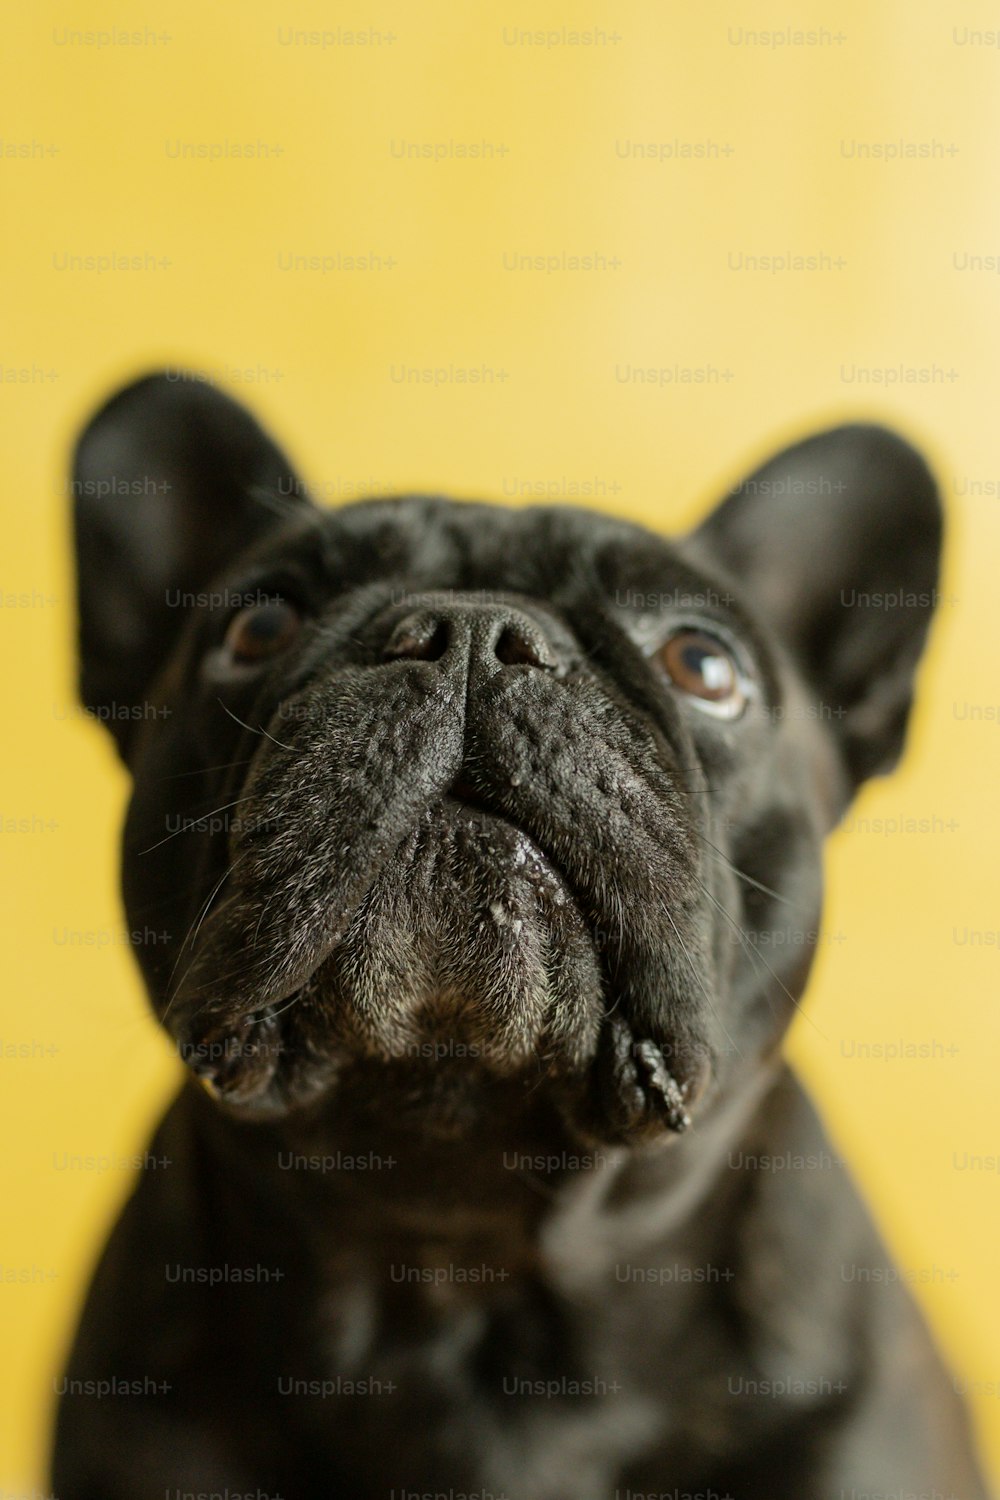 a close up of a black dog with a yellow background